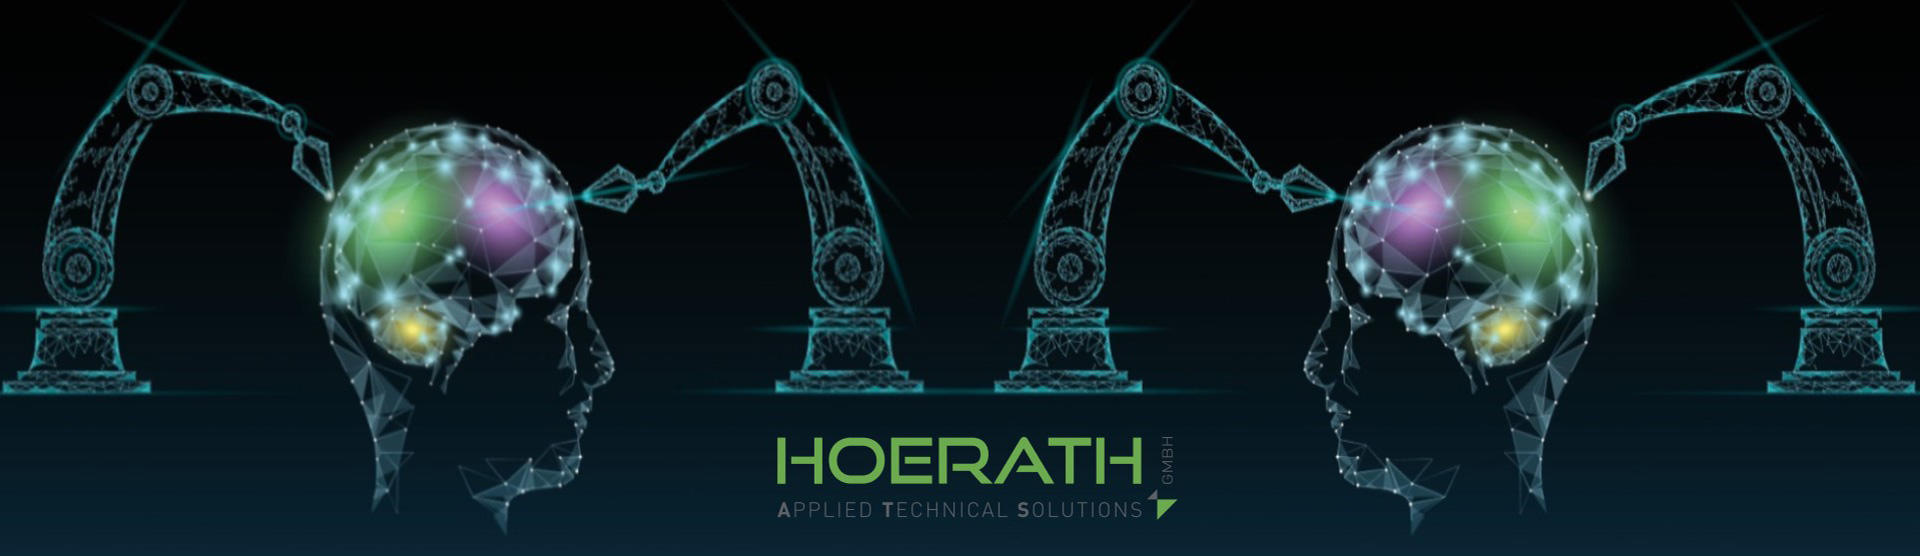 HOERATH GmbH APPLIED TECHNICAL SOLUTIONS